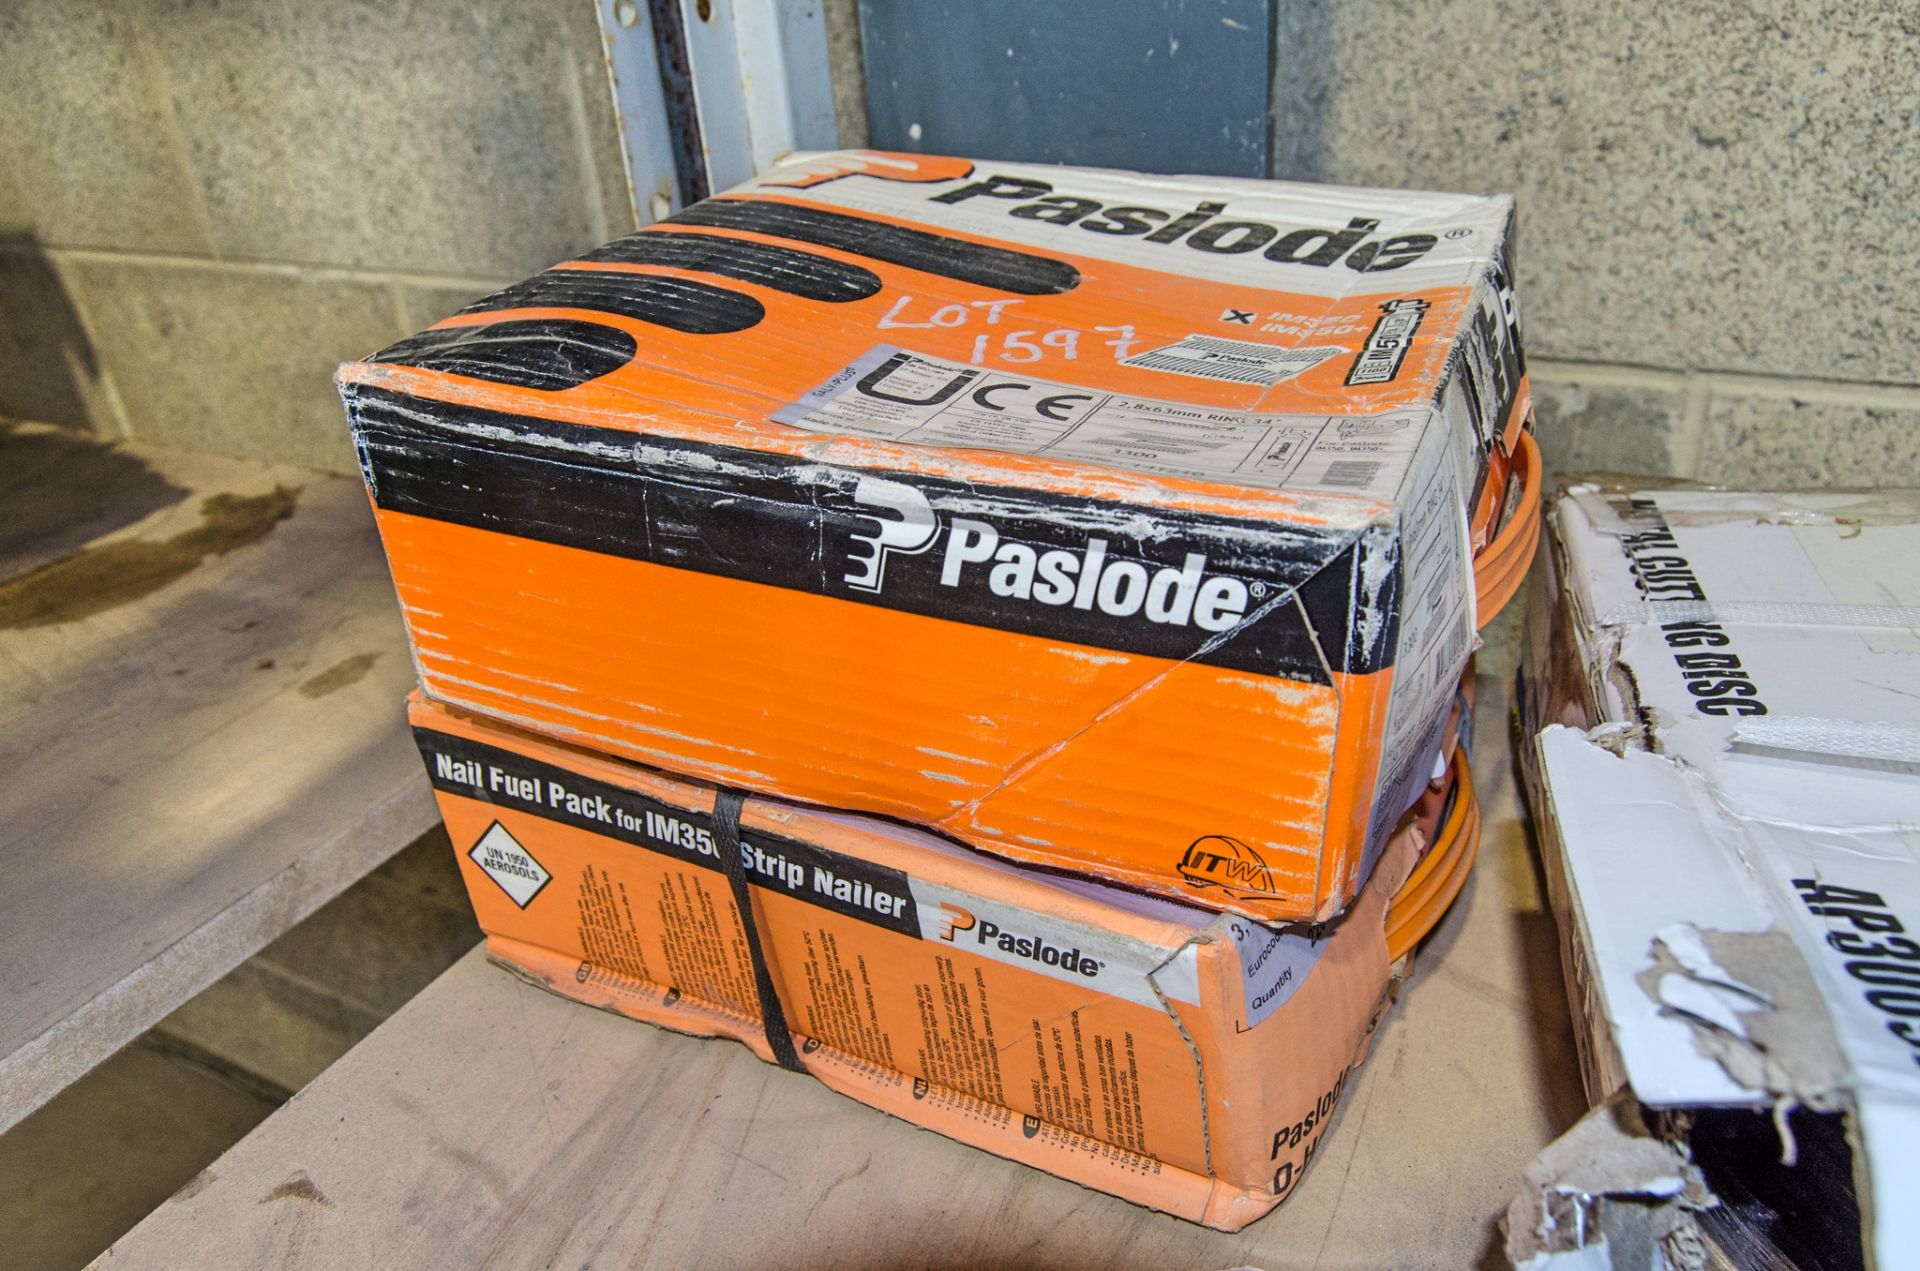 2 - boxes of Paslode IM350 nail fuel packs